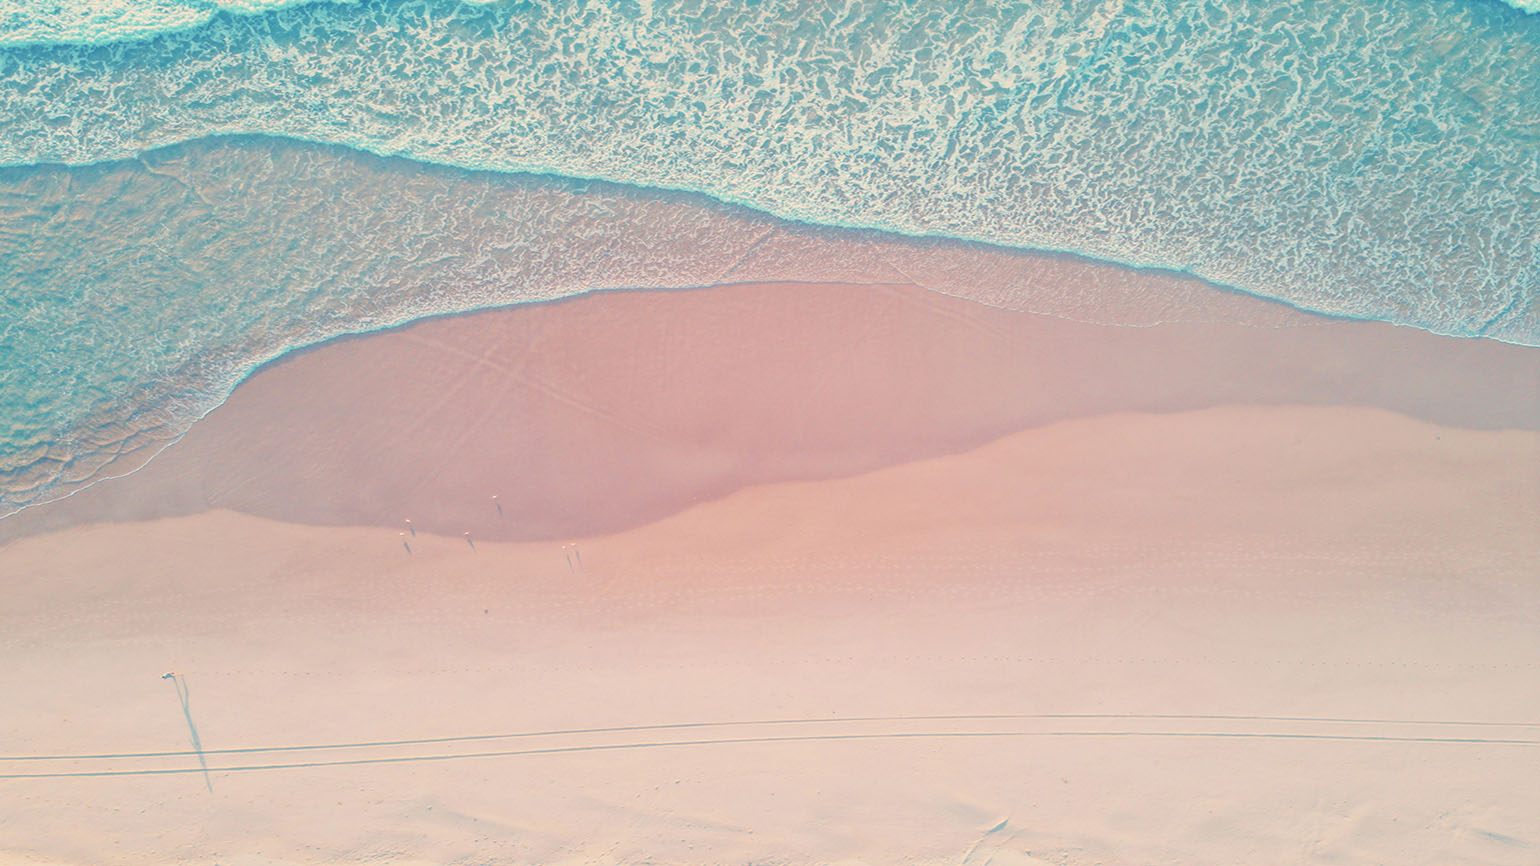 A scene of pink sand and blue water remind us to find our source of contentment in God.